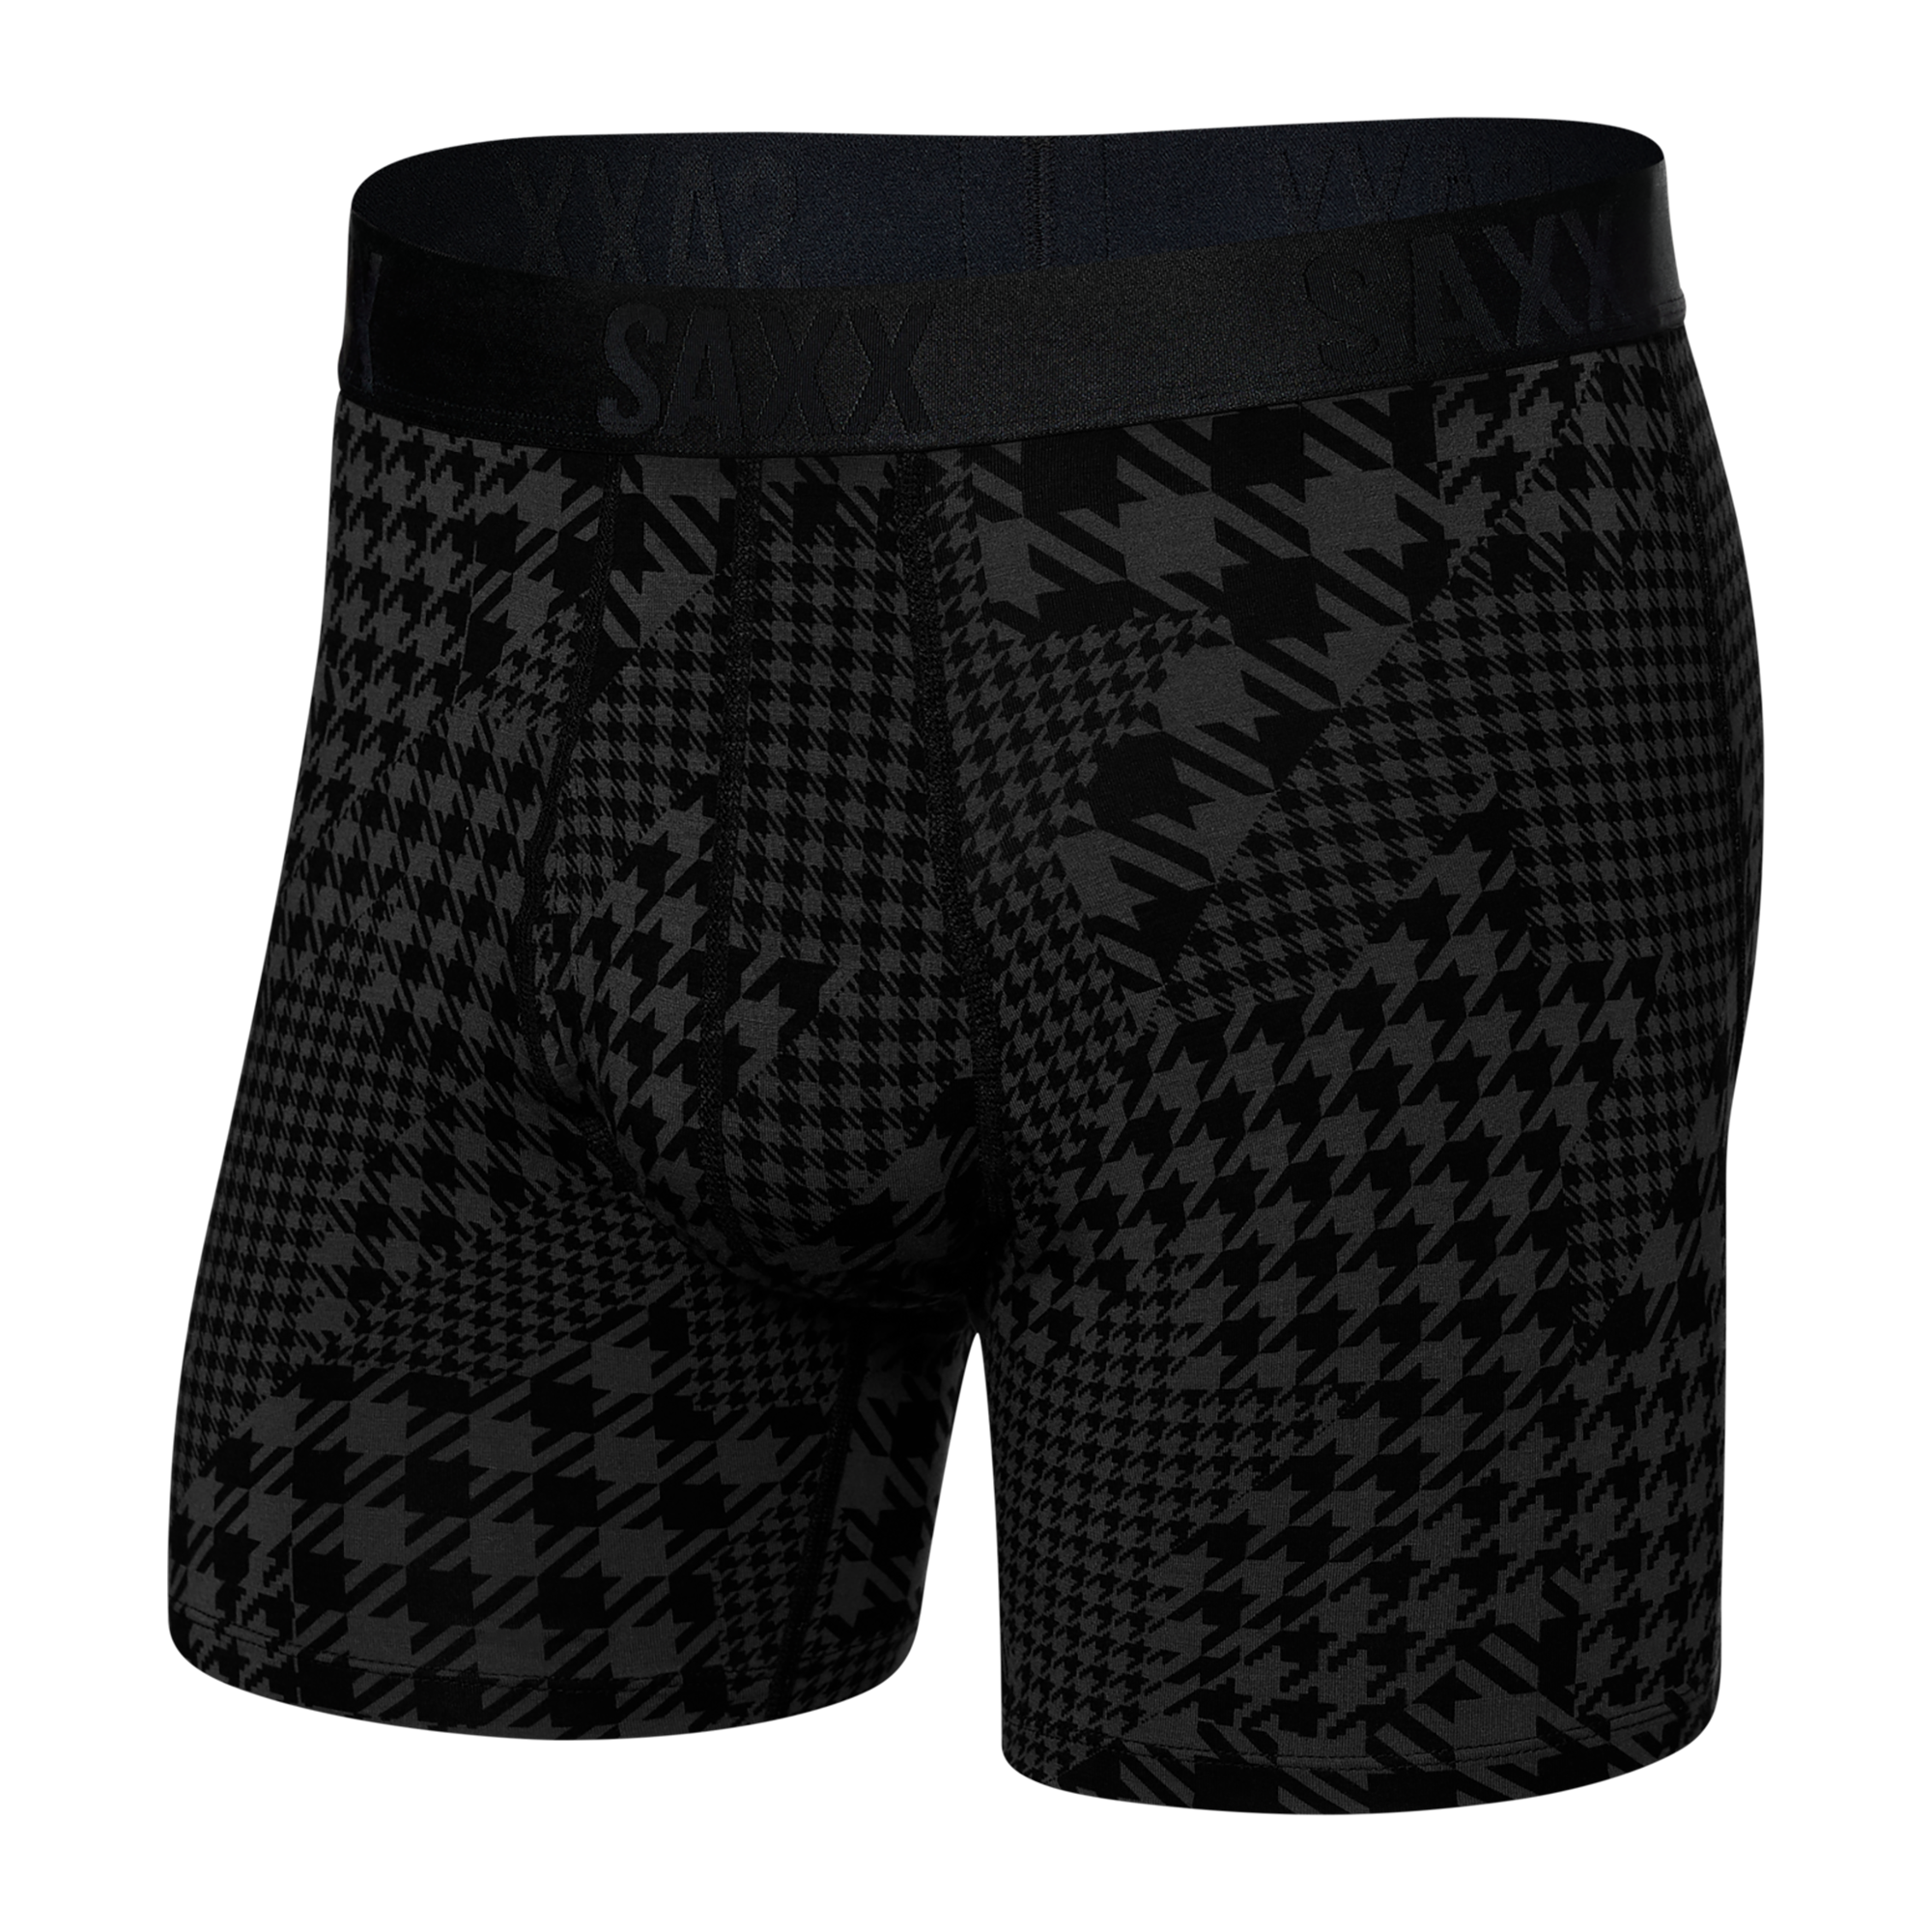 Front of 22nd Century Silk Boxer Brief in Dogstooth Camo- Black